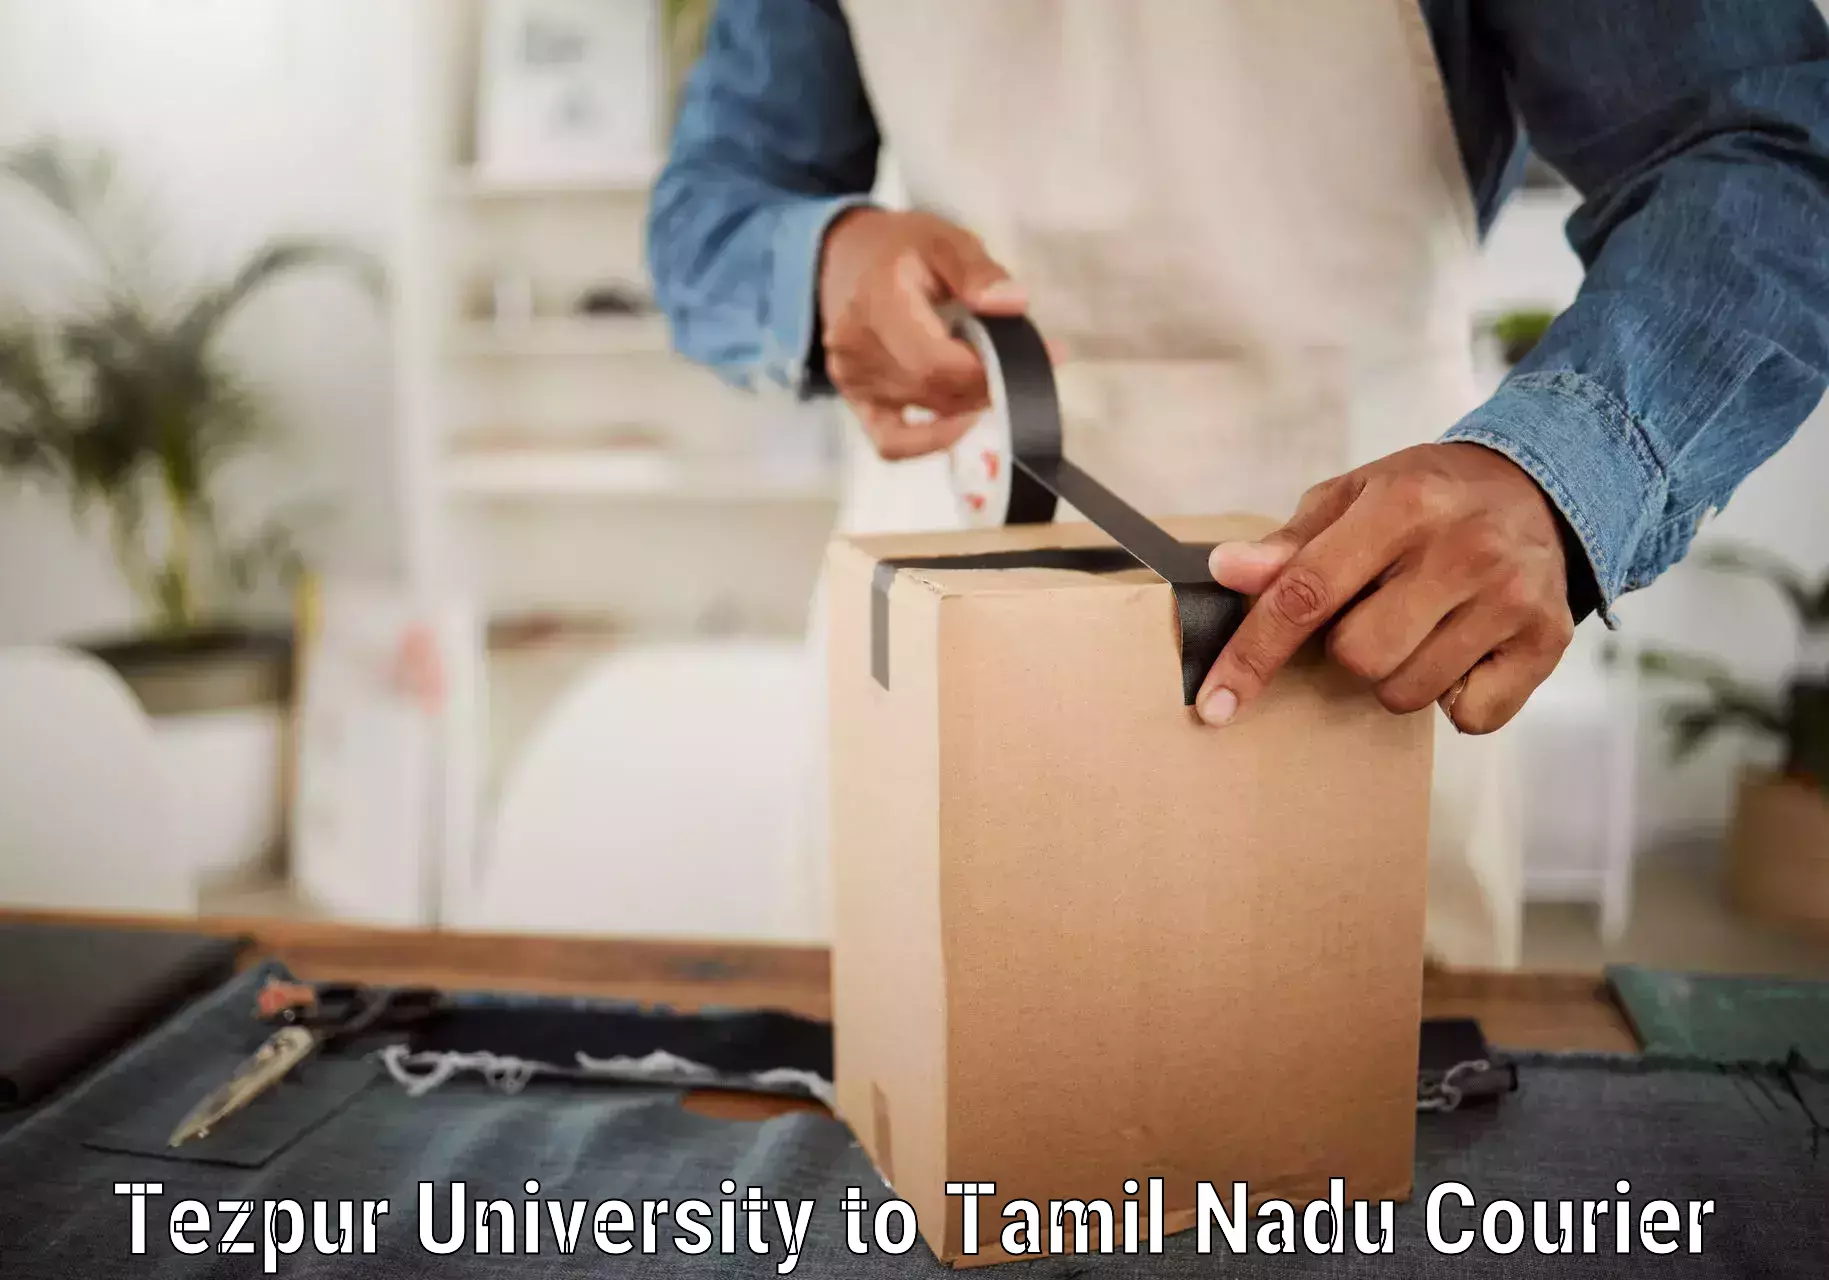 Custom courier packaging in Tezpur University to Trichy